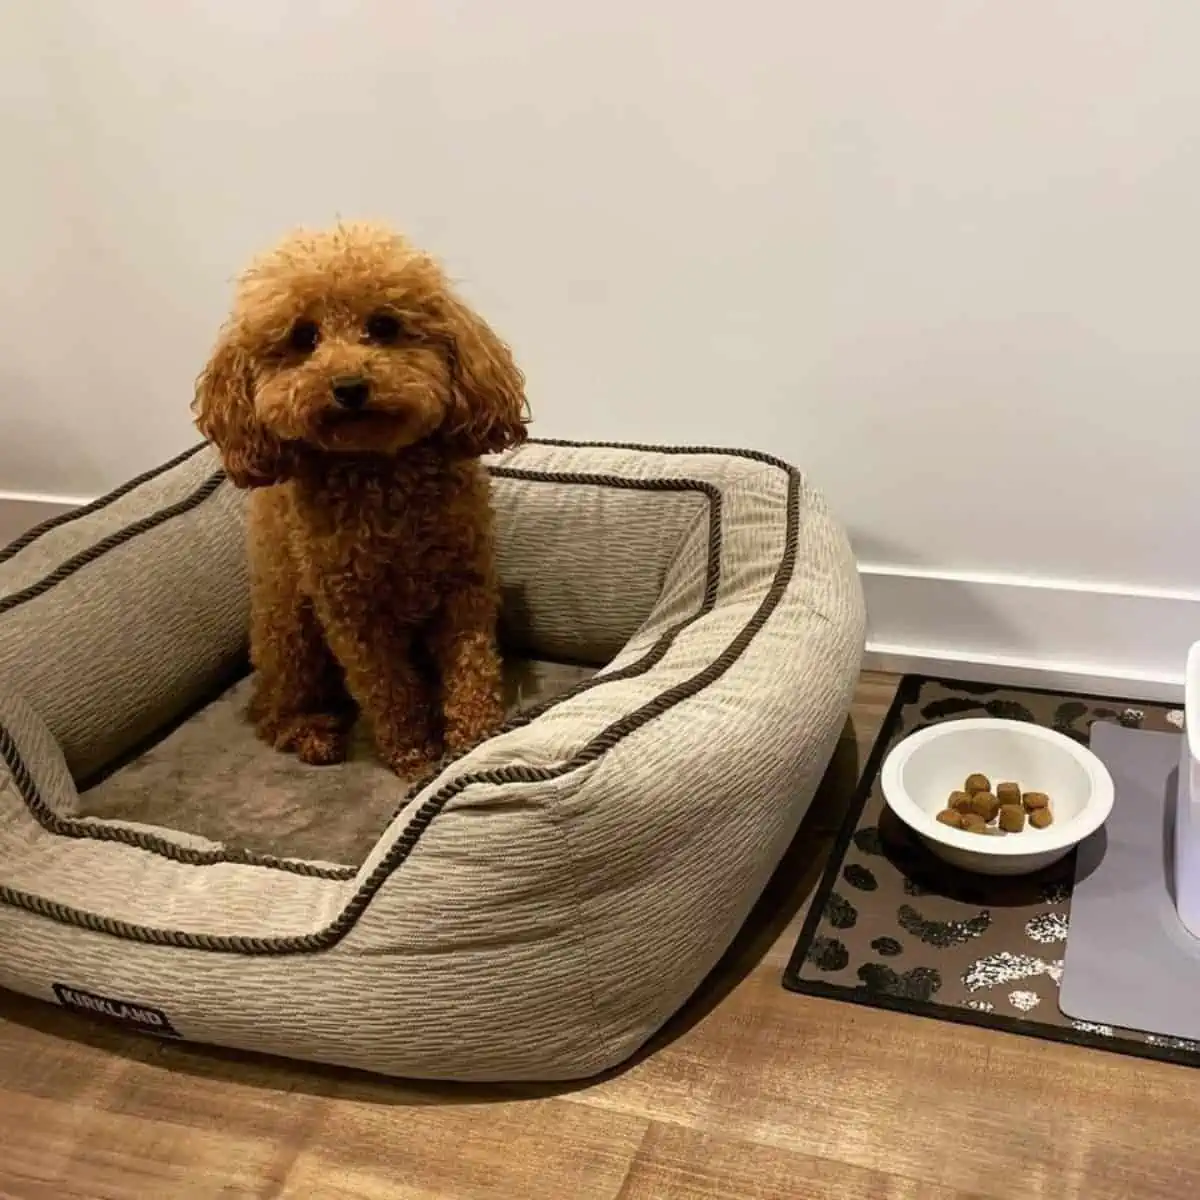 Poodle and food bowl